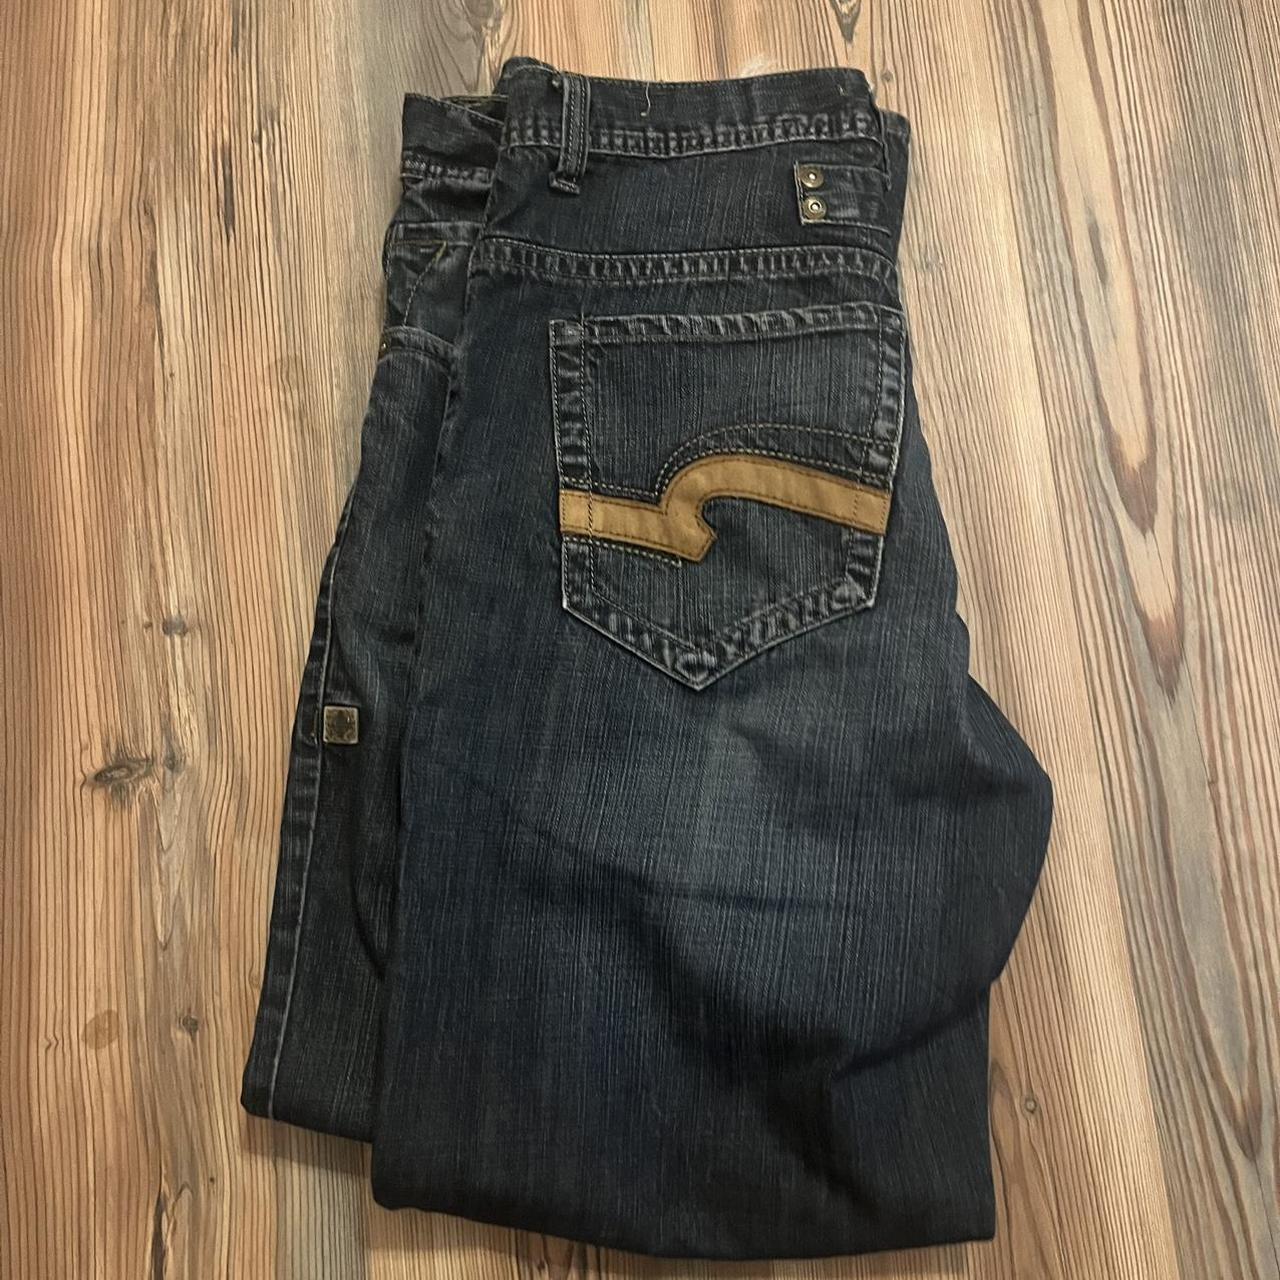 Very nice lot 29 jeans 🎃 crazy detailing all over... - Depop